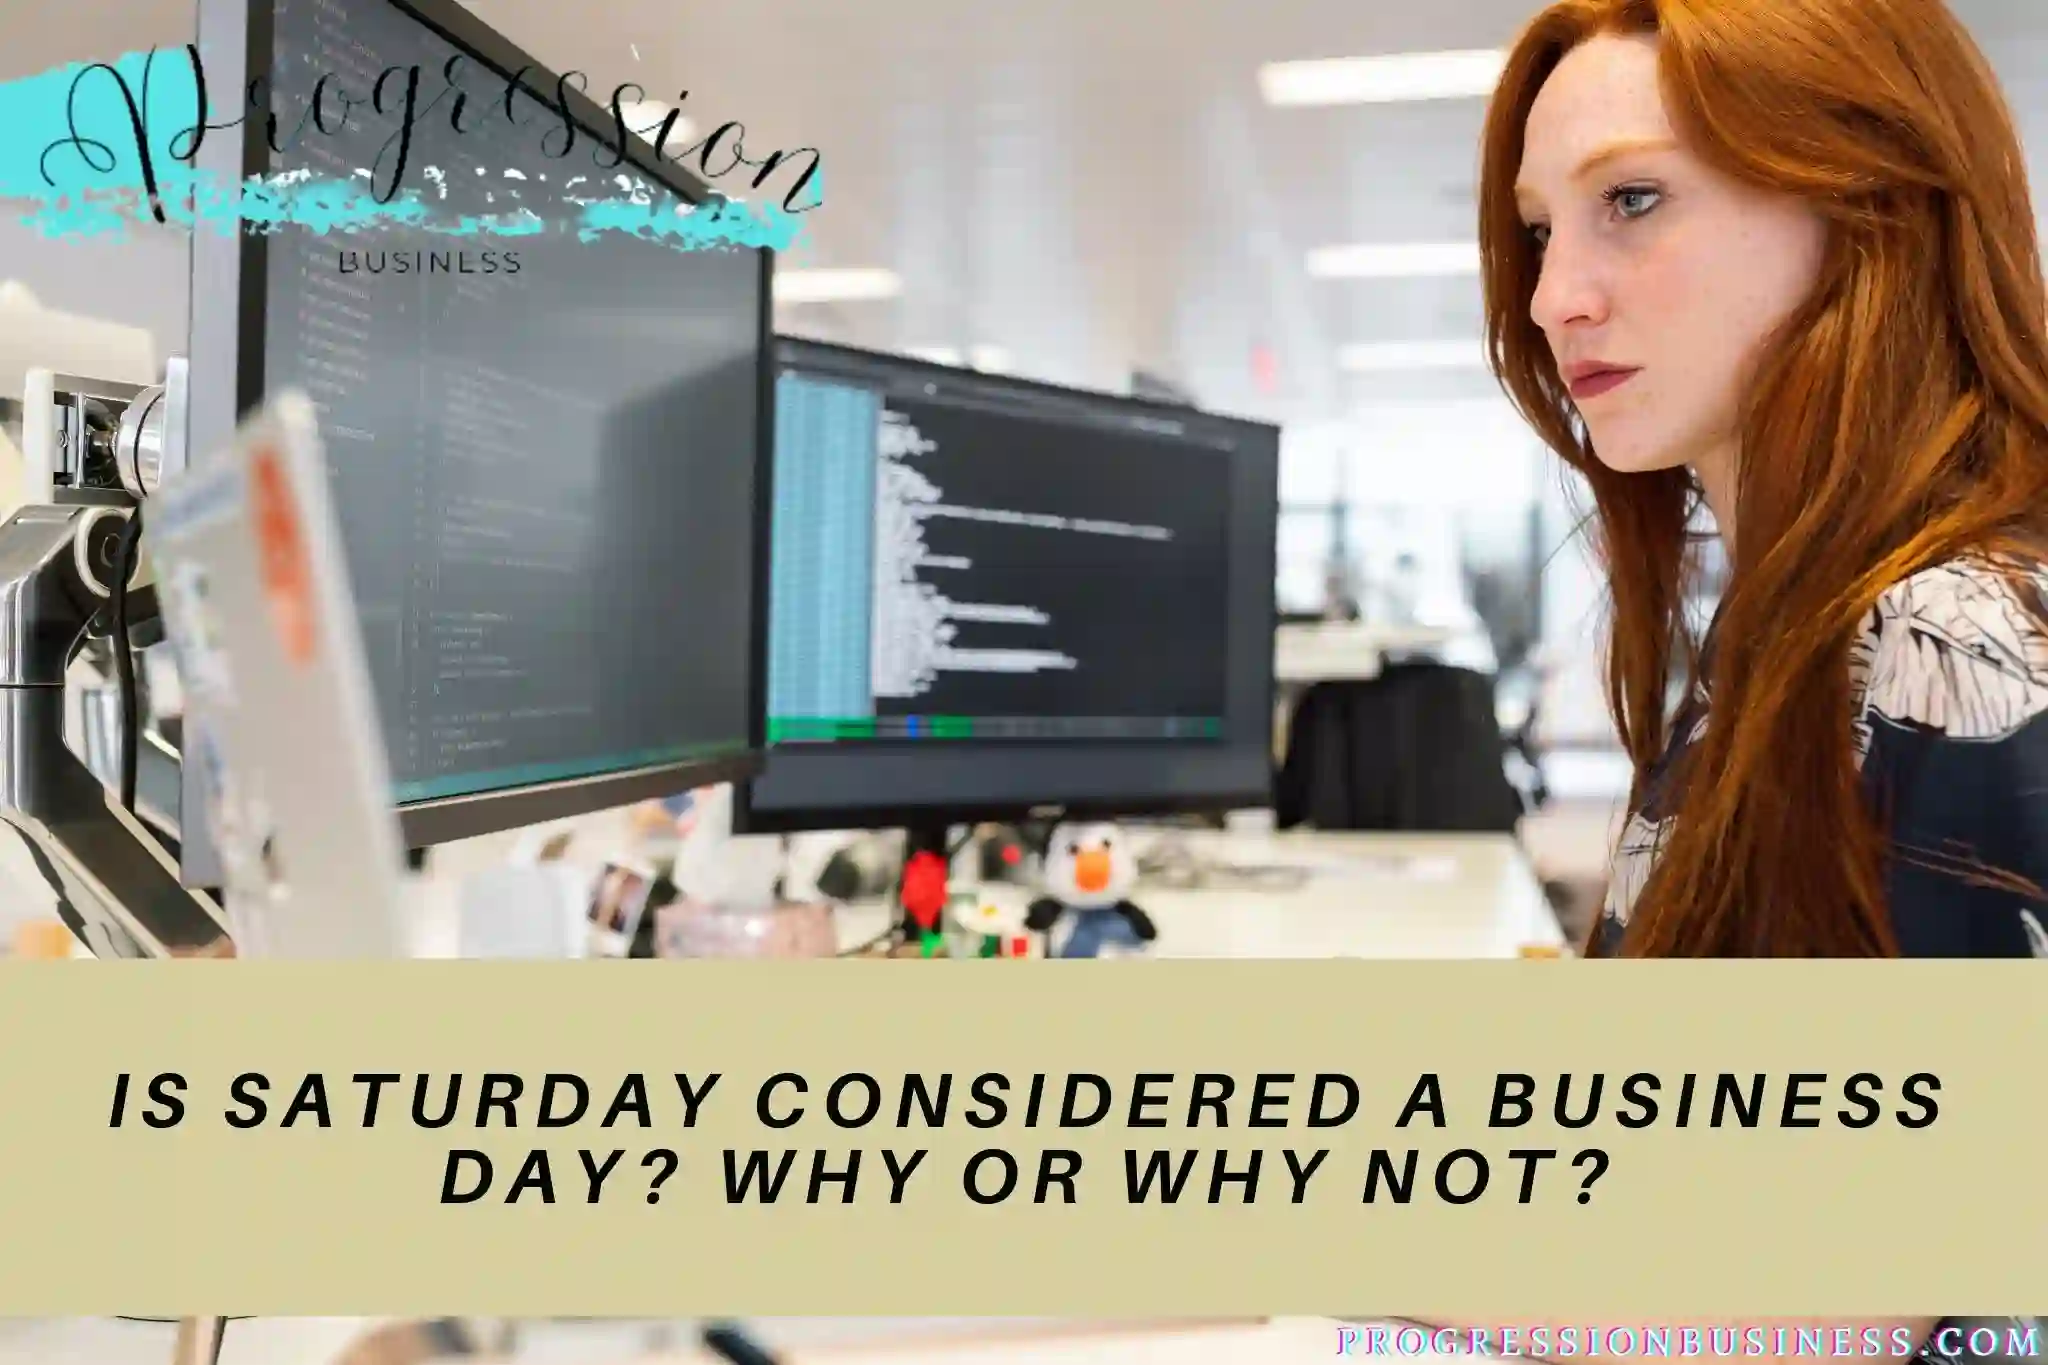 We’re going to tackle a topic that we’ve seen a lot of questions about over the past few years: Saturday as a business day. Whether you’re a freelancer, consultant, or running your own business, this question comes up time and time again. But the reason it comes up so frequently isn’t that we all live in the wrong century—it’s because there are some people out there who don’t consider Saturday a business day. Here you find more information 12 BEST FREE YouTube To MP3 Converter [Updated 2022] As many of you know, Saturdays have always been considered a day off. We don’t do much in the business world on Saturdays. However, this isn’t always the case. Some companies treat Saturday as a business day and others don’t. According to the U.S. Bureau of Labor Statistics, 61% of businesses surveyed said that they close for the day on Saturdays. This is just a few percentage points higher than the number of employers who reported that they never close on Saturday. 5 Reasons You Should Consider Saturdays As “Business Days” Saturdays are typically treated as leisure days and aren’t seen as business days. However, if you’re serious about growing your business, it makes a lot of sense to consider Saturdays as business days and schedule time for activities related to your business. Why? Here are five reasons to consider Saturdays as business days: 1. Saturday is the only day where your customers can find you on social media. 2. Saturday is the only day where you can market new offers. 3. Saturdays offer the best opportunity to promote upcoming events and special promotions. 4. The Saturday after Thanksgiving is traditionally the slowest day of the year for retailers. 5. Saturday offers you the chance to create a consistent marketing presence and drive customer engagement. The Definition Of A Business Day For this article, the term business day is defined as the first calendar day of the month, regardless of the month. It doesn't matter whether it's Monday, Tuesday, Thursday, or Friday; as long as it's the first calendar day of the month, it's considered a business day. Some Facts About the Definition of a Business Day Here’s a fact you may not have known about the definition of a business day: On average, US business days run for 24 hours. And while some days fall outside of this average, such as Saturday, Friday, and Sunday, those days are typically short and rare. The Legal Implications Of Saturday Being A Business Day This legal implication was brought up by a reader who wanted to know if it’s possible to close a deal on a Saturday but make the agreement a legally binding contract. He was concerned that he wouldn’t be able to do the deal if a Saturday business day was added to the agreement. After some research, I found the answer to be yes. You have the authority to close a deal on Saturday if you include the date as part of the agreement. So, in that case, he didn’t have to worry about closing the deal if Saturday became a business day. The History of Saturday as a Business Day The history of Saturday as a business day is interesting. Historically, in the United States, there were laws on the books which allowed businesses to open on the first business day of the week (Sundays) to ensure the health and welfare of workers. In those days, the law required businesses to close on Sundays. As a result, stores and many other businesses were closed on Saturdays. The weekend business day began in earnest in America with the Civil War. During the war, Abraham Lincoln used Saturday as a day of rest for the nation’s factory workers. With the end of the war and a growing economy, however, it became increasingly clear that Saturday was not a good day for business. Some businesses have a flexible working schedule. While the majority of the workforce is still expected to follow 9-5 business hours, some industries have started to change the rules. According to a recent study conducted by the United States Bureau of Labor Statistics, over 15 million workers work flexible hours. While the vast majority of those workers (14.3 million) work within the traditional 40-hour week, an additional 5.6 million workers in professional and business services work outside that timeframe, typically due to fluctuating client requirements and the need to complete projects on time. This shift in the American workforce has not been without controversy. But according to a 2012 survey by FlexJobs.com, 61% of respondents say that flexible schedules help them meet deadlines, maintain focus, and prioritize tasks effectively. Here you find more info Crackstreams Tyson Is Shut Down? Here Are The Best Alternatives! Don’t work on weekends unless you have a good reason. There are two reasons why you should avoid working on a project on the weekend: 1) it’s hard to focus on the task and 2) it’s a bad habit to get into. The most effective hours to work are during the morning or early afternoon. This is because people usually start to feel sleepy after 9 a.m. and if you work late, it just isn’t as productive. Some say Saturday is not a business day. Some people consider Saturday to be their day off, and businesses should follow suit. Other experts say it’s the ideal time to start working. According to research, some 60 percent of consumers do not make purchases on a Saturday. This means that you have a good chance to make sales on that day, especially if you’ve already created a good impression on consumers with your first impressions. How much money should a business be making to consider If a business has a product or service worth $10,000, it can be fairly certain that it will be profitable at that price point. This is because the marginal cost of producing that one unit of the product is $10,000. The only way to make a profit for $10,000 is if 100 customers are willing to pay $1,000 for that product. But if it takes three more units of that product to satisfy those 100 customers, then the total cost of production is $10,000 + $3,000 = $13,000. So, even if the business makes a $2,000 profit on each unit sold, it still loses money after paying $13,000 for those 100 units. Here you go Title Xfi Complete: How Expand The Exciting Wifi Experience? Why Saturday May Be A Business Day As a business owner, you might have already determined that Saturdays are your least profitable day of the week. However, according to a study by the University of California Berkeley, researchers discovered that the weekends are just as productive for businesses as the weekdays. So instead of thinking about how to make your business profitable on Friday, think about how you can be more productive on the weekends. Definition of Business Days vs. Holidays Most businesses operate on a Monday through Friday schedule. There are exceptions to this rule, but most business days (as defined by the U.S. Department of Labor) are Monday through Friday, excluding holidays. However, holidays fall on weekends, and businesses often operate on holiday schedules on Fridays and Mondays. Therefore, businesses may be closed on Thanksgiving Day, Christmas Eve, New Year’s Day, Martin Luther King Day, and President’s Day, amongst others. Some people refer to these as “business days”, but this isn’t technically correct because these are also considered holidays. The Impact Of Saturday Business on Your Bottom Line While many people believe that Saturday is for rest, the reality is that most people spend more time working on Saturday than on any other day of the week. Saturday is also a busy day for retailers. In fact, according to research conducted by The Conference Board, spending at brick-and-mortar retailers increases on Saturdays by 13 percent over the previous Saturday. So why is that? Is it just the fact that many people are feeling lazy? Or maybe it has something to do with the fact that we all get a little hung up on that Saturday night shopping rush? No matter the reason, it’s clear that there is a significant increase in consumer spending at stores on Saturdays. Here you find related articals WHY BIG EYES COIN AND SHIBA INU, POWERED BY ETHEREUM, MAY OVERTAKE DOGECOIN AND SHIBA INU The Law of 12: The Most Important Business Management Principle The Law of 12: The Most Important Business Management Principle is just a more elaborate version of a quote from Warren Buffet, who said, “If you're not embarrassed by the first performance of your outcome, you've stayed also extended." The theory after this rule exists rather easily: Don't waste too much time perfecting your product or service. The time you spend perfecting your first iteration should be spent developing your product/service into something worthwhile. Does Saturday count as a business day? Why or why not? To answer this question, we need to start thinking about the word "week." "Week" in terms of business has changed a lot over the past few decades. Back in the 1960s and 1970s, the U.S. Federal Government set business hours every Monday through Friday, from 8:00 am to 5:00 pm. So if you ran a retail store or a factory, you had to open on Monday, close on Friday, and have a three-day weekend. Now, the vast majority of people in the U.S. have some sort of flexible schedule. Many businesses operate on Saturdays, Sundays, or holidays, and they have some flexibility with how to spend their working days. If we're trying to decide if Saturday counts. Top Business-related article New KickAss Torrents (KAT) Sites In September 2022 What Is The Meaning of “Business Day” In The United States? The term business day has been around since the 1800s, but it is the United States that makes the distinction between working hours and weekends. Other countries like the UK, Germany, and Australia don’t make this distinction and instead define the term as a full eight-hour workday. In the United States, the typical business day begins at 8 am and ends at 5 pm. There is also an exception to this rule. When the federal government is in session, the term business day is extended from 10 am until 3:30 pm, except holidays. Should We All Stop Doing Business on Saturdays? We’re all familiar with the argument of whether it’s better to be a B2B company than a B2C one. The debate goes something like this: B2B companies generally sell to other businesses, and therefore, the customer is often not in a hurry to pay. Thus, a Friday or Saturday close date is preferable for most B2B customers. On the other hand, B2C companies sell to consumers, who are always in a hurry to pay. Thus, a Sunday or Monday close date is preferable for most B2C customers. I think the answer to this question lies somewhere in between This site article How To locate stores Near You With Your Mobile 6 Reasons Saturday is NOT considered a “business day” Here are six reasons why Saturday is NOT considered a business day: 1. Many business owners prefer to run their business on Saturdays and Sundays. 2. It’s cheaper for employees to get paid for their regular pay period on the weekend than during the week, and some employers offer better benefits. 3. It’s easier to work on the weekend than during the week. 4. Employees need more vacation time on weekends. 5. Businesses are generally closed on Saturdays and Sundays. 6. Business owners need to get up early on Saturday morning. Many business owners prefer this article Destiny 2 Where Is The Wayfinders Compass? Does The U.S. Have A National Holiday? To the best of our knowledge, there isn't any national holiday in the United States to celebrate the fact that it's the 51st state in the Union. However, many people make a day of celebrating the addition of Texas to the union. We've found the biggest crowds are gathered on the second Tuesday of October, which happens to be the day that Texas joined the union. There's also the 4th of July and Cinco de Mayo. If Saturday is Your Business Day, Then Do You Really Need A Business? So why is Saturday not your business day? This was the question I had asked myself while I was planning my weekend. This question has led me to answer the question “what can I do on the weekends that I am not doing during the weekdays?” and to learn that I accomplished require company. I have enough customers and business opportunities to last me the whole year. All I need to do on the weekends is to spend some quality time with my family. Here you find more related articles Facts About MacBook 12in M7 That Will Make You Think Twice Learn More About Business From progression business